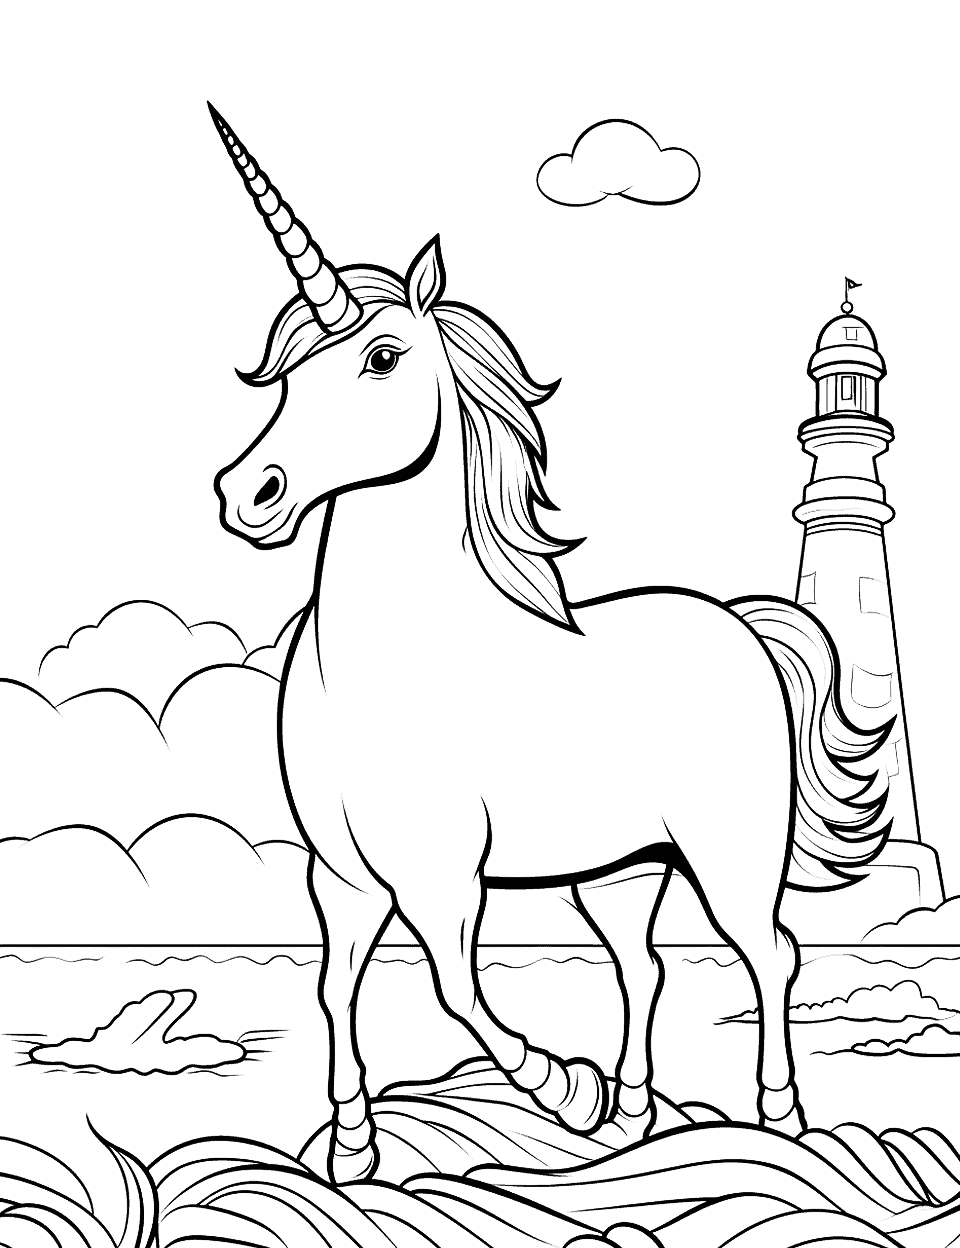 Unicorn and Lighthouse Coloring Page - A unicorn near a coastal setting, with a lighthouse and the ocean in the background.